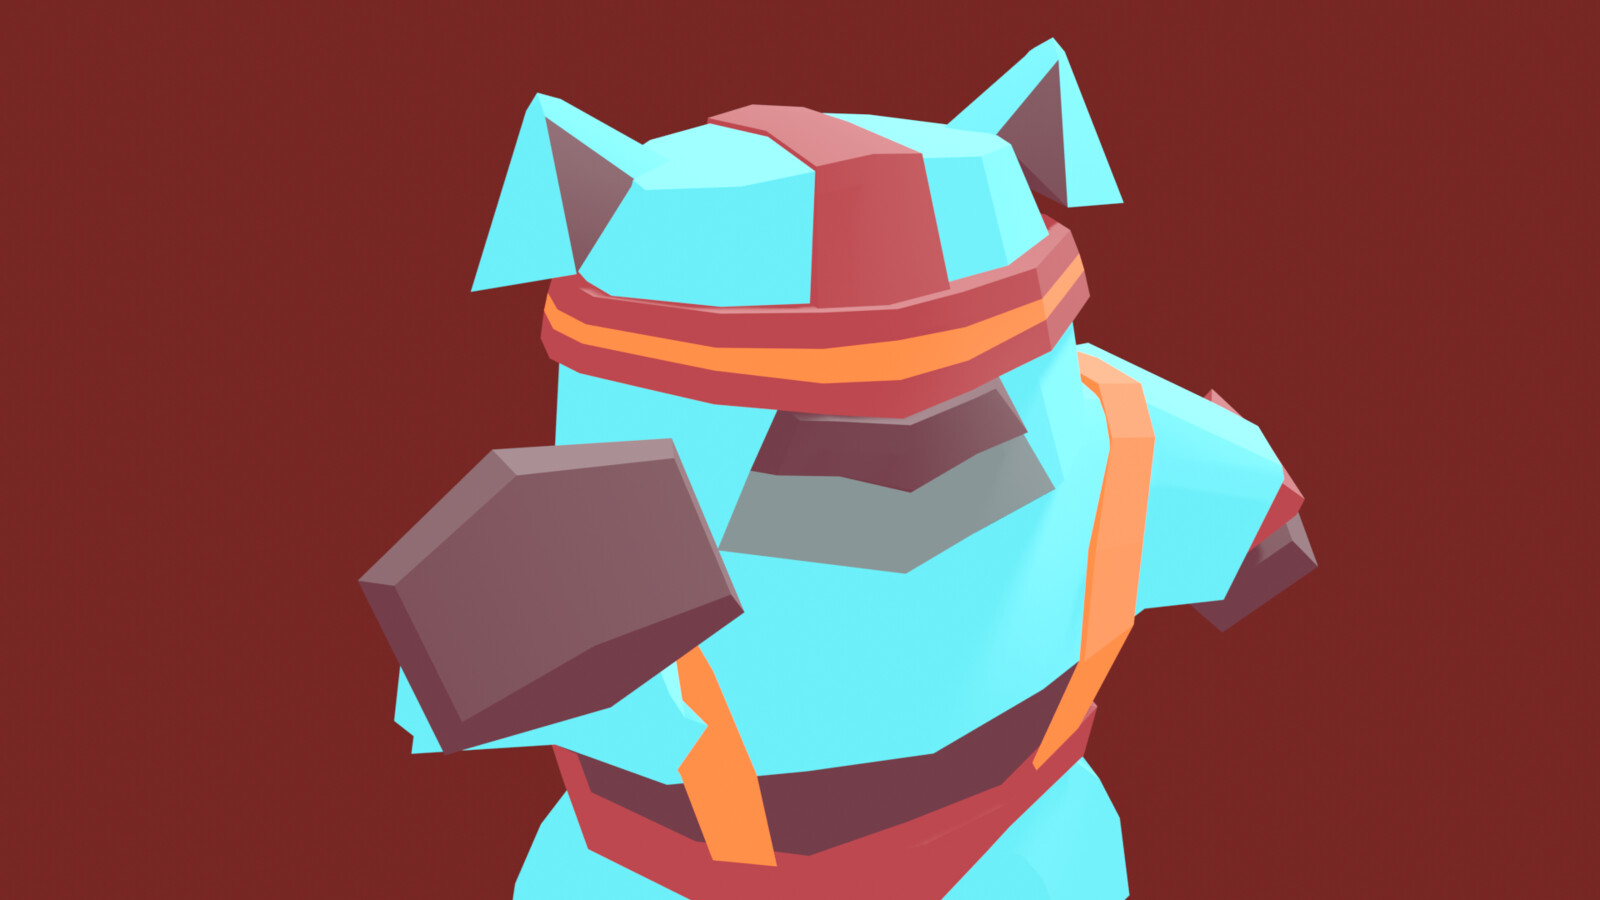 To get to the low poly version, I first made a high poly version.